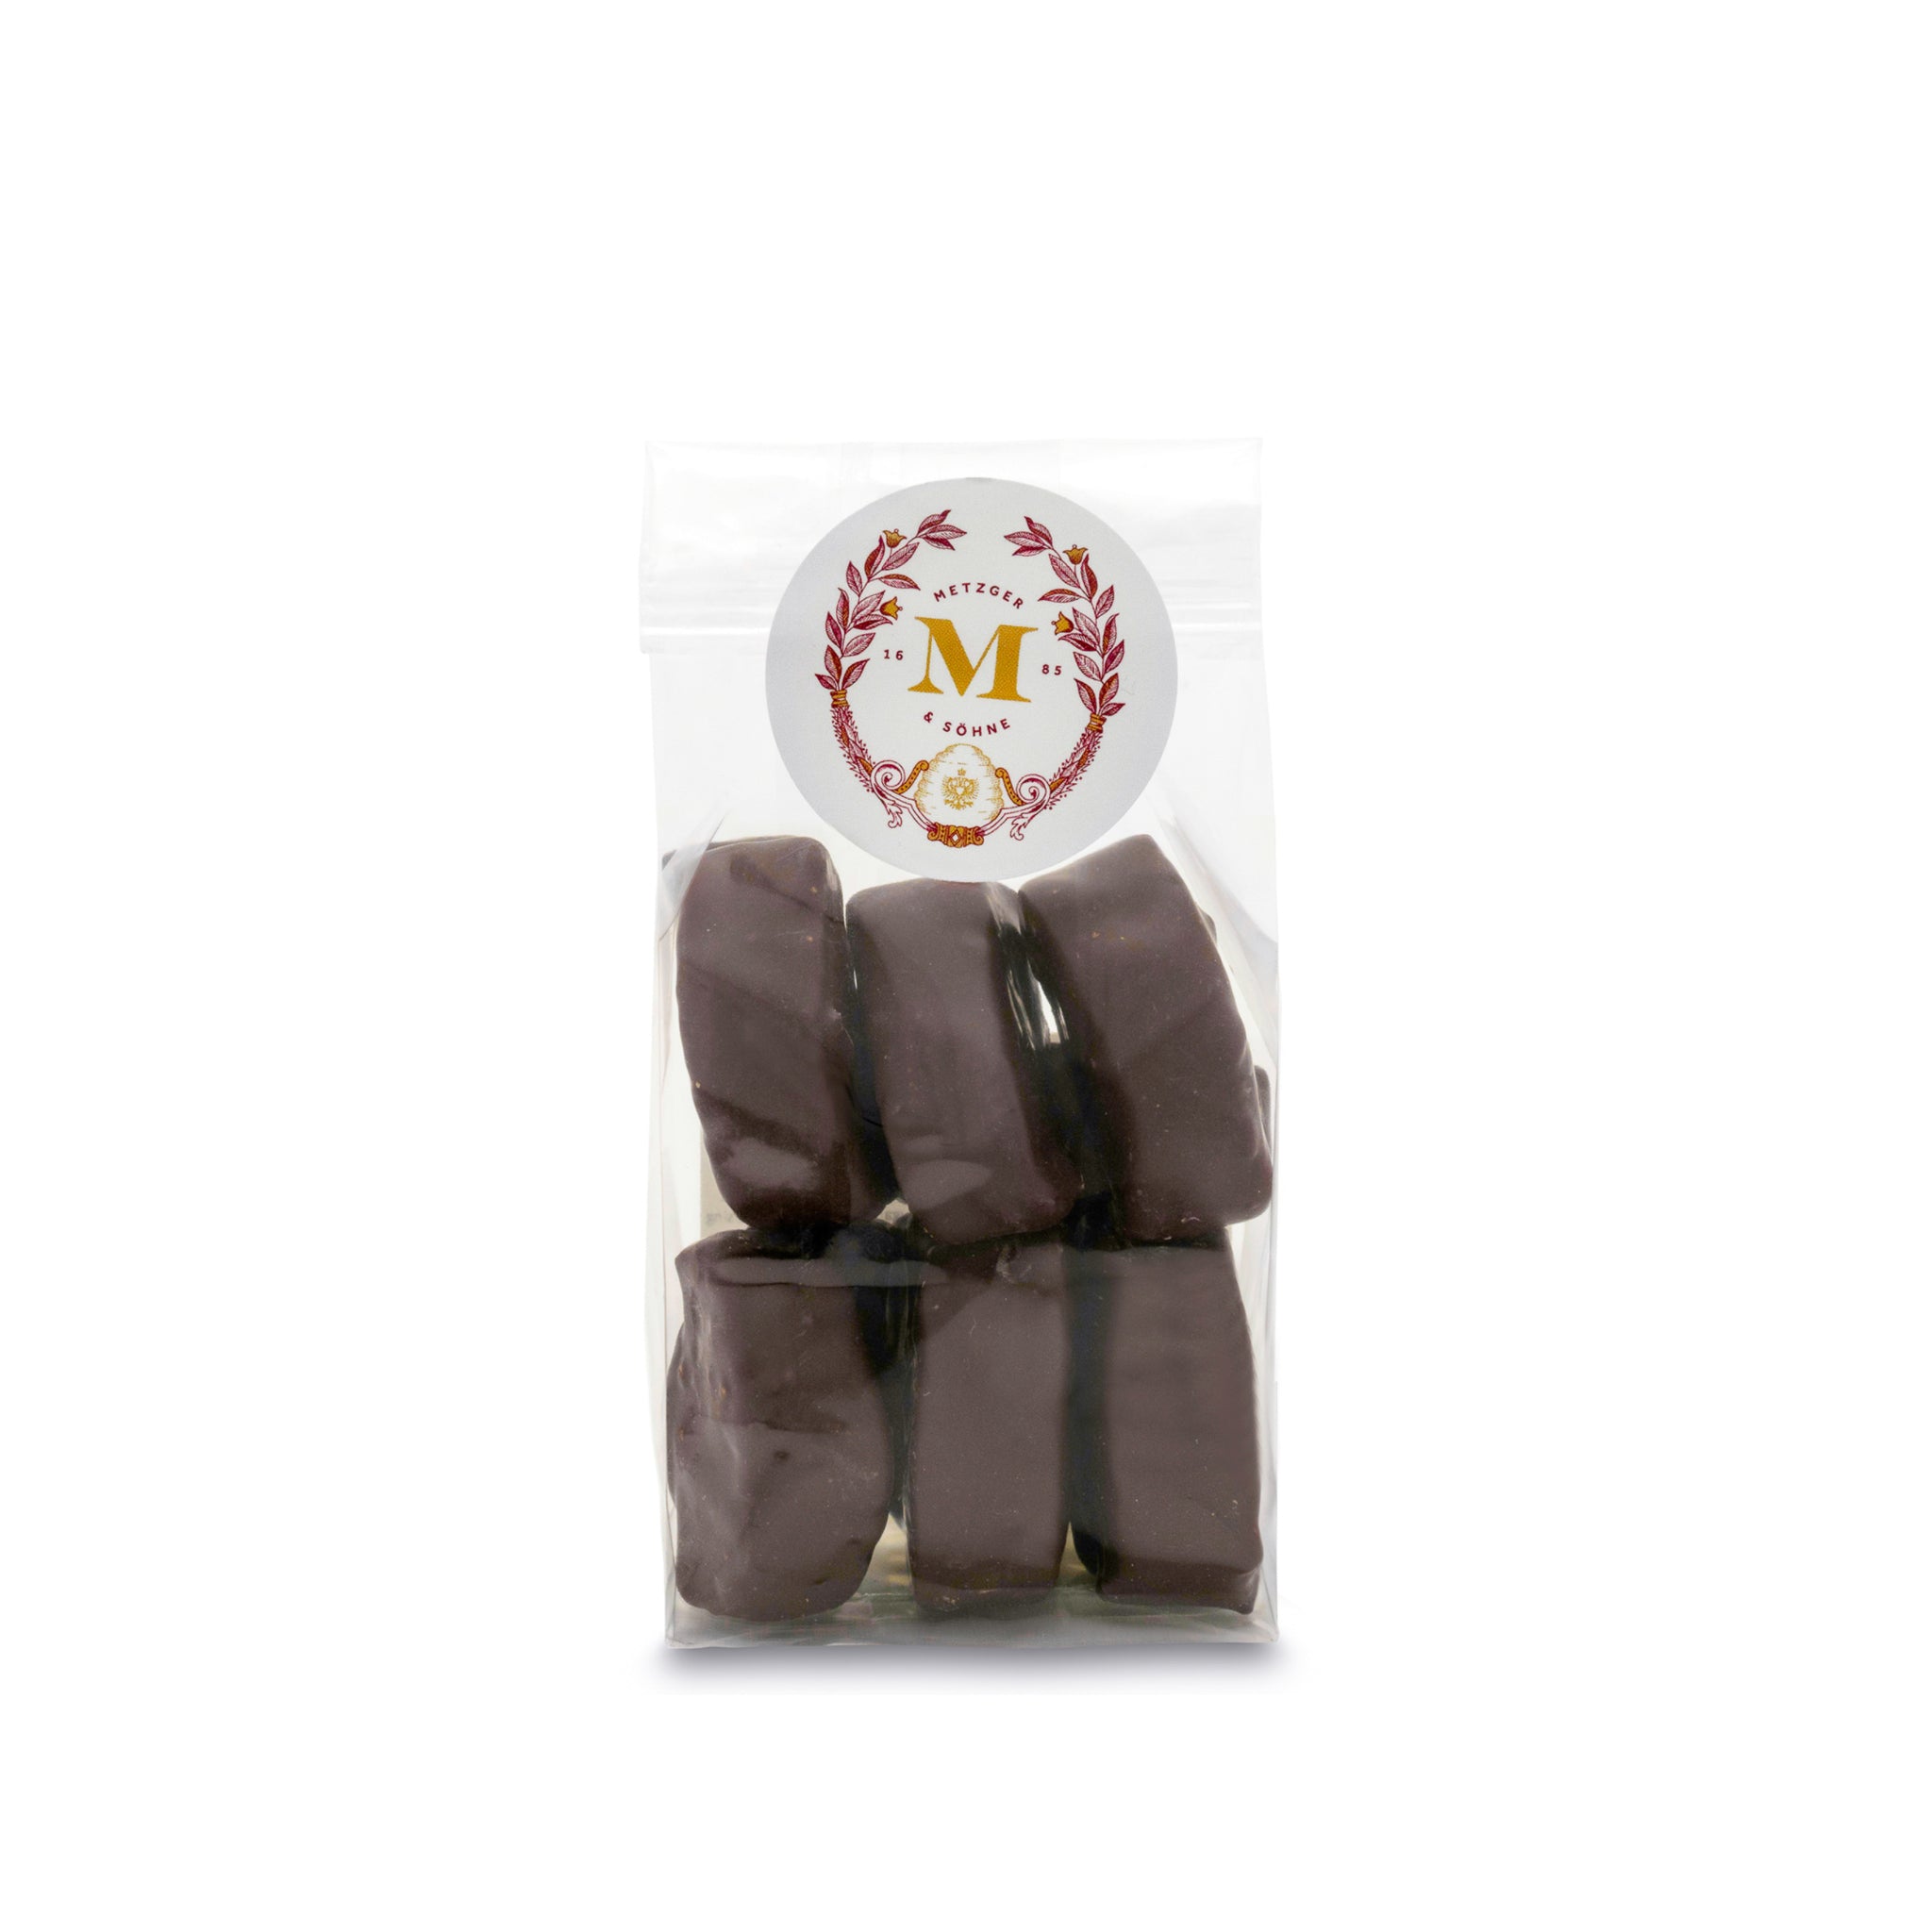 Juicy Lebkuchen bites with a rich mix of fried fruits and nuts, encased in high quality dark chocolate. The high quality chocolate couvertures enchant with an intense chocolate taste, perfectly complimenting our Lebkuchen and fillings. A true Christmas staple.